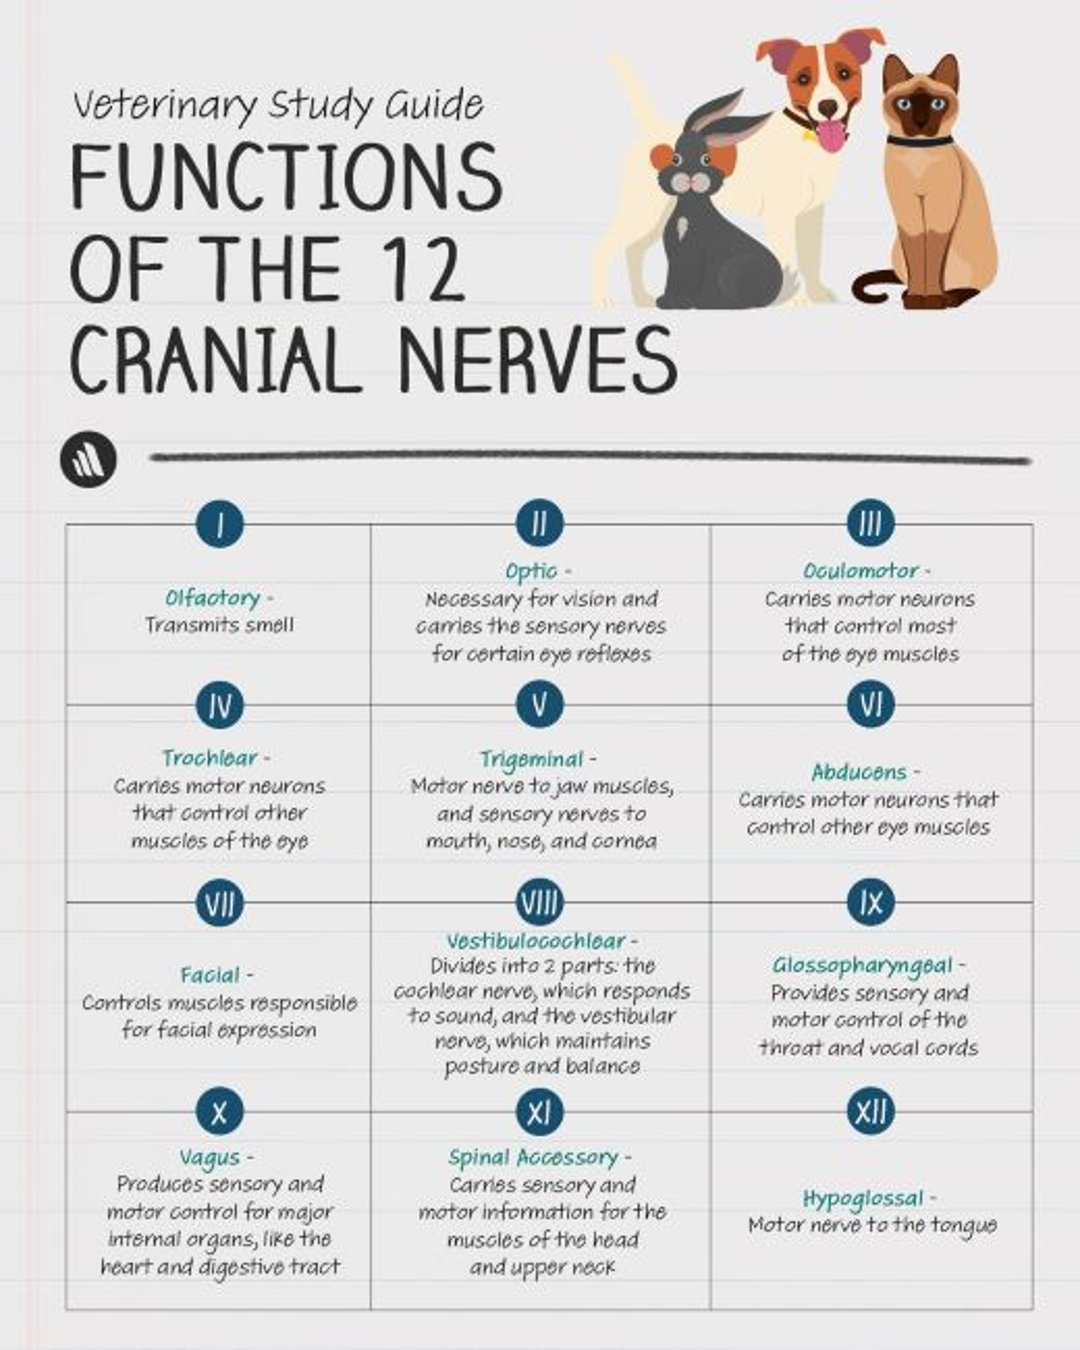 Functions of the 12 Cranial Nerves